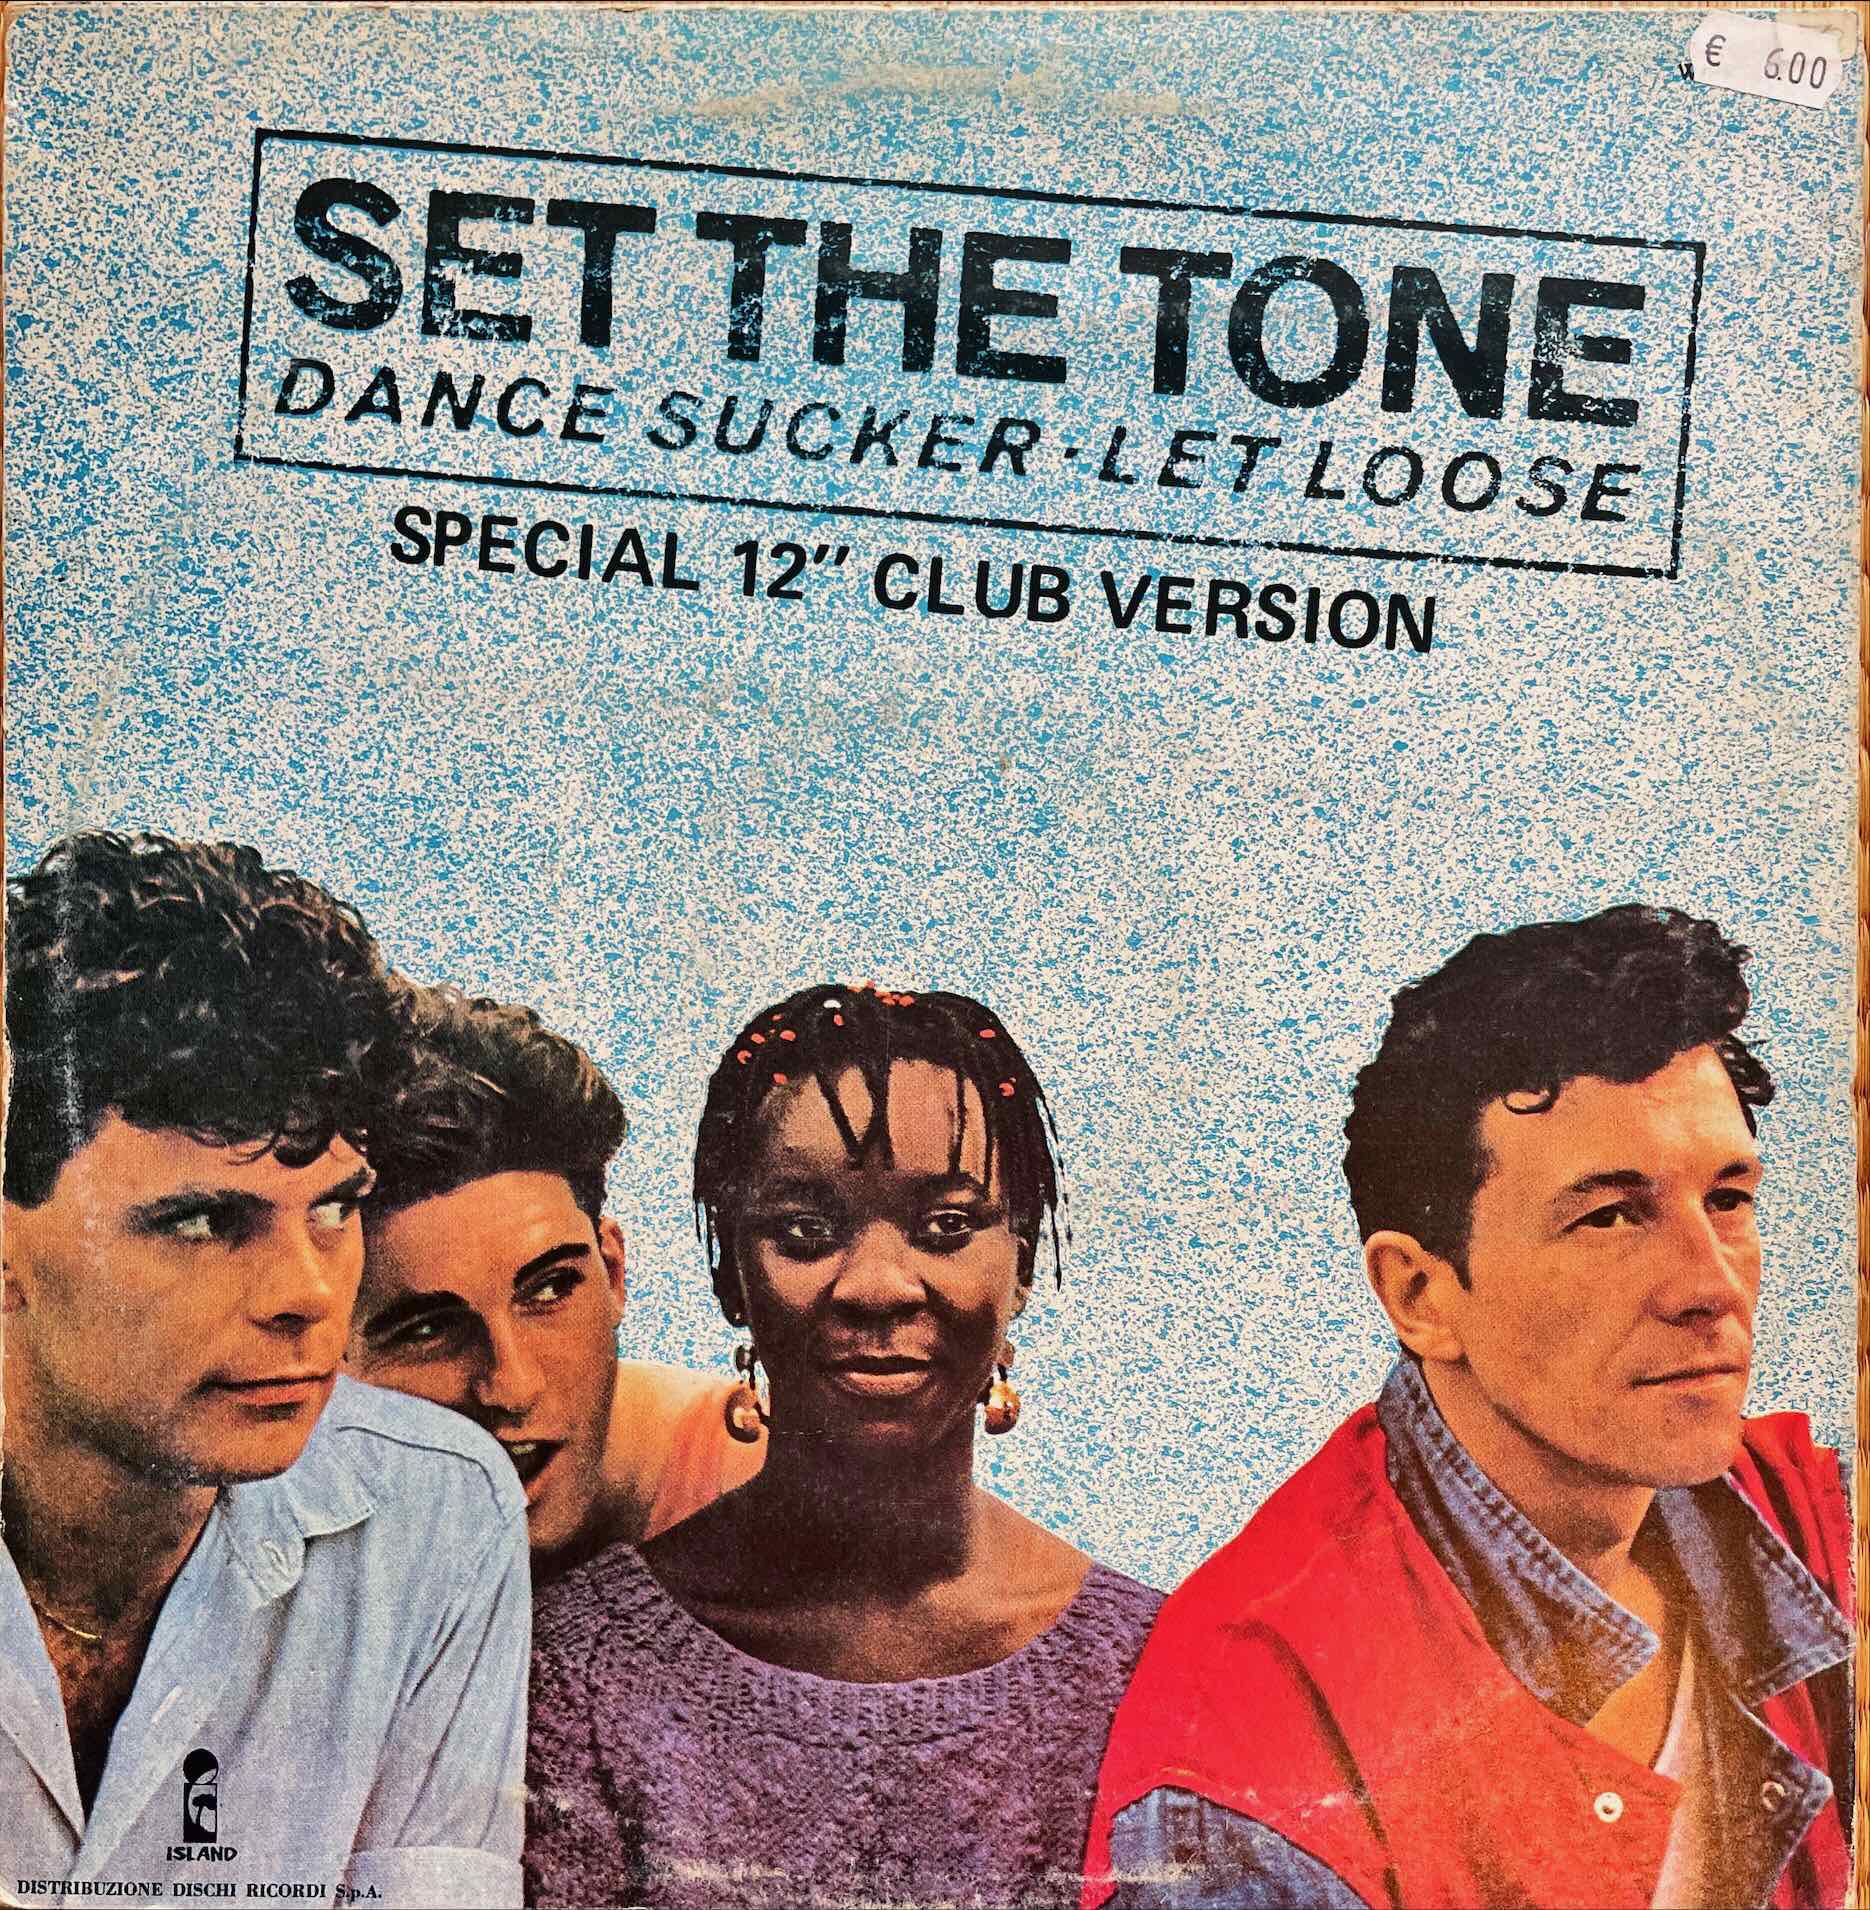 Set The Tone – Dance Sucker (Special 12'' Club Version)12 inch sleeve back image